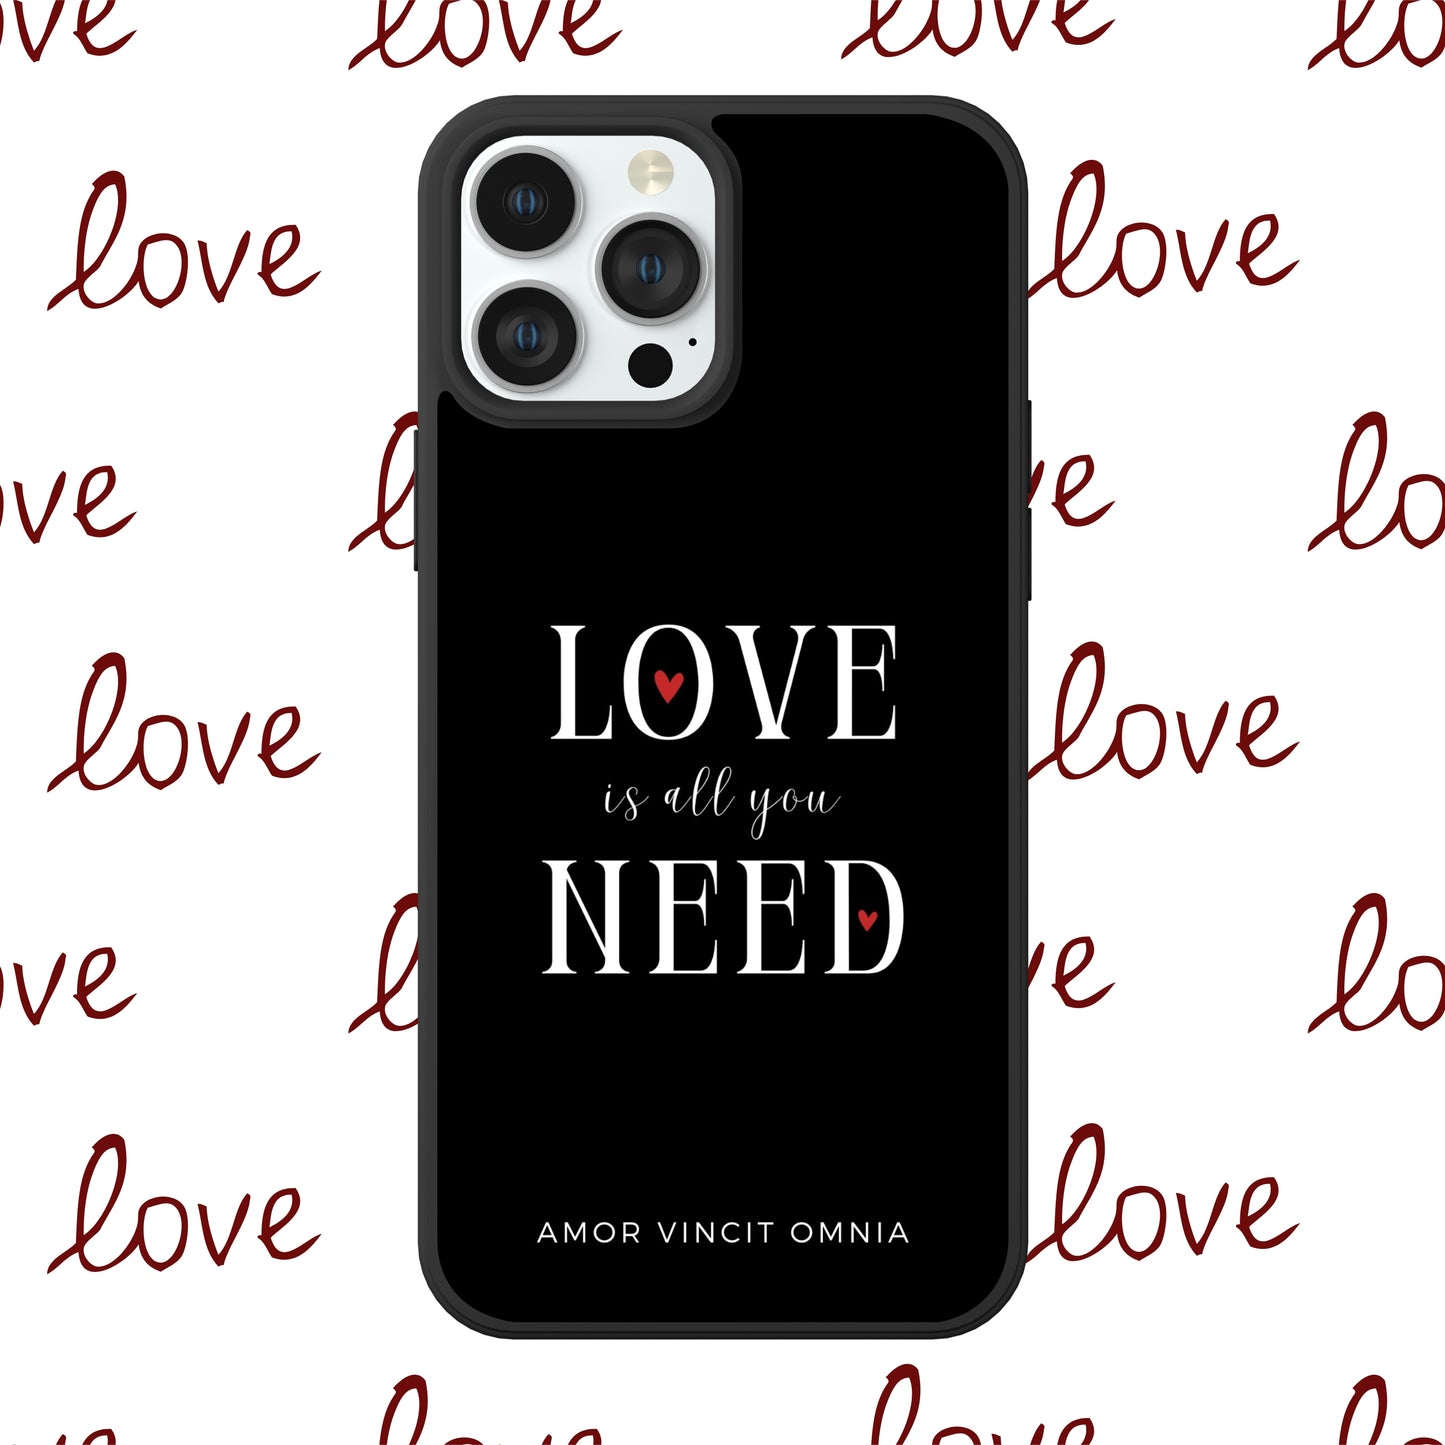 9. COVER LOVE IS